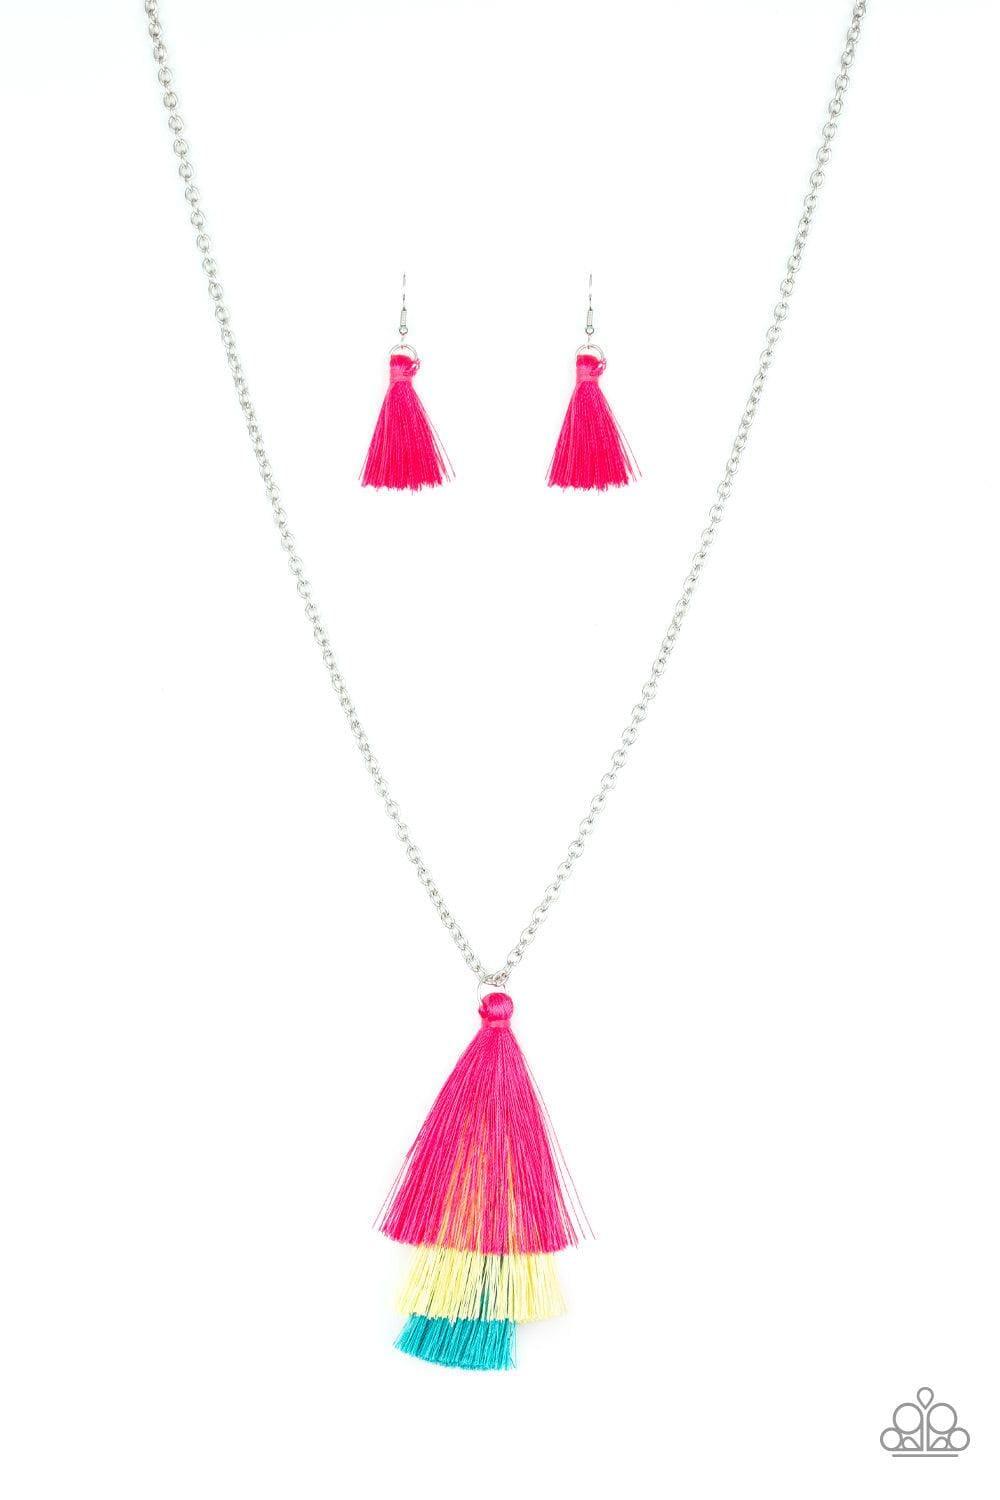 Paparazzi Accessories - Triple The Tassel - Multicolor Necklace - Bling by JessieK